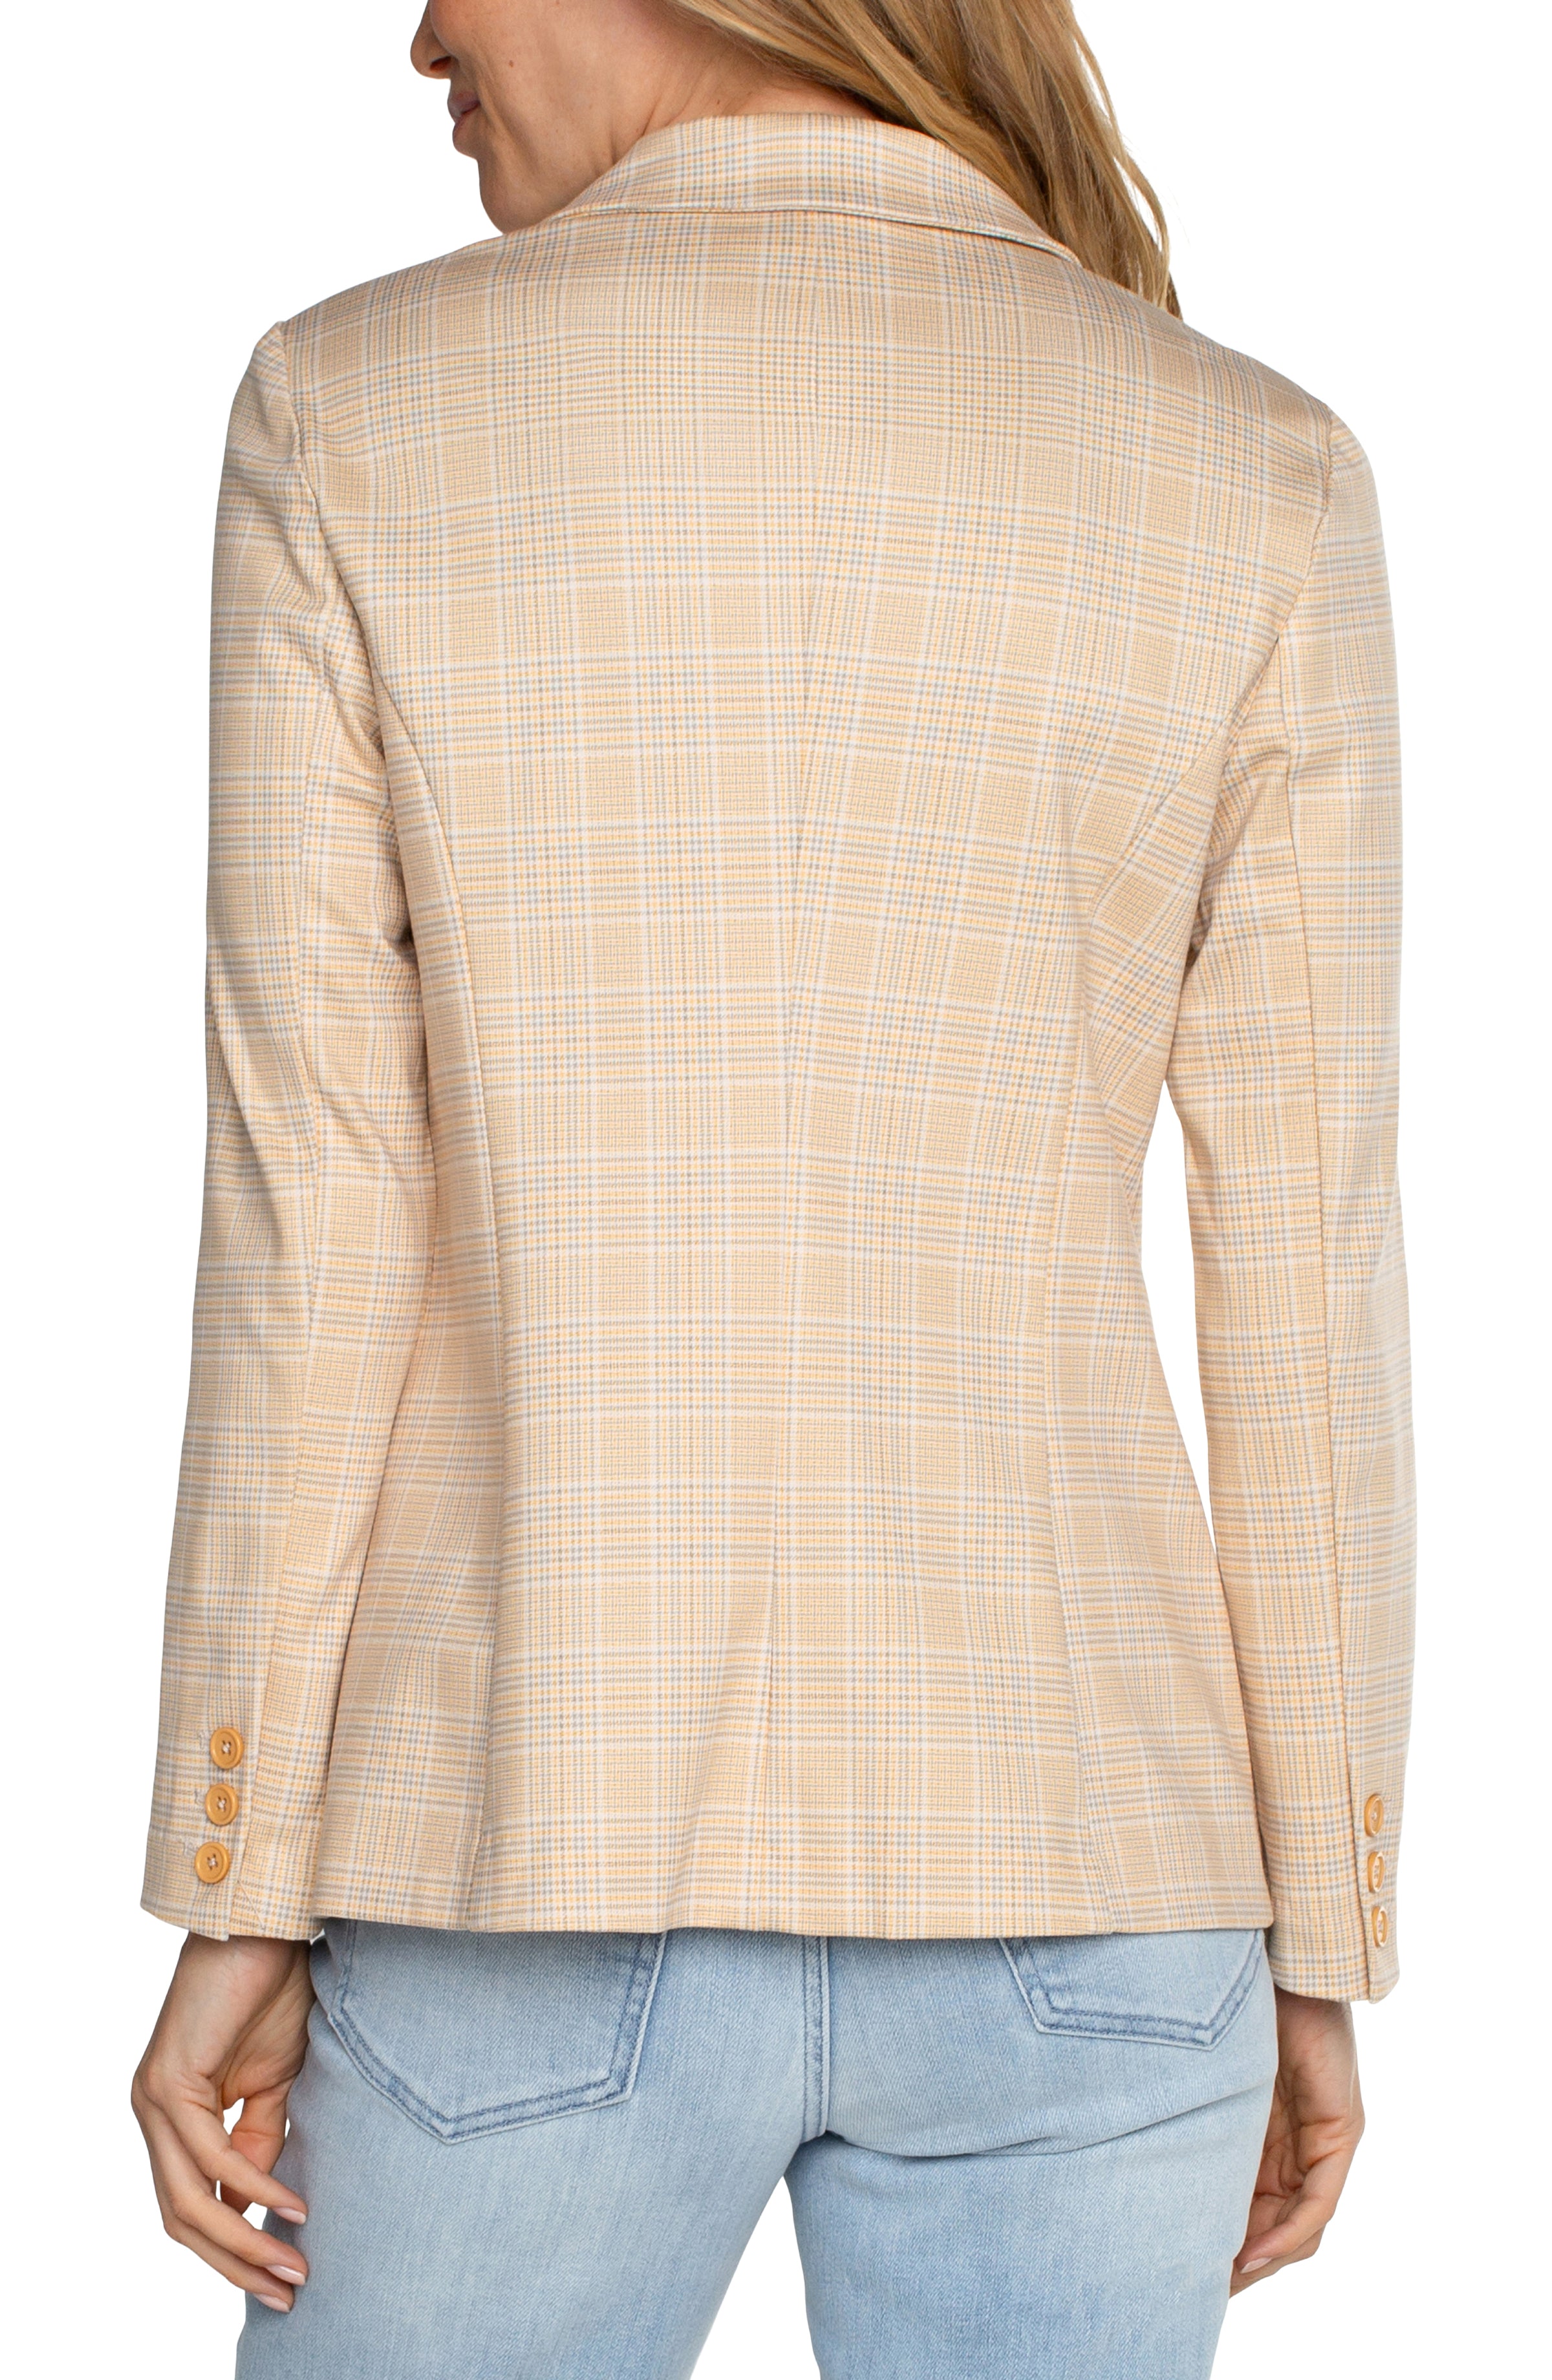 LVP Fitted blazer - Flaxen Gold Glen Plaid Back View